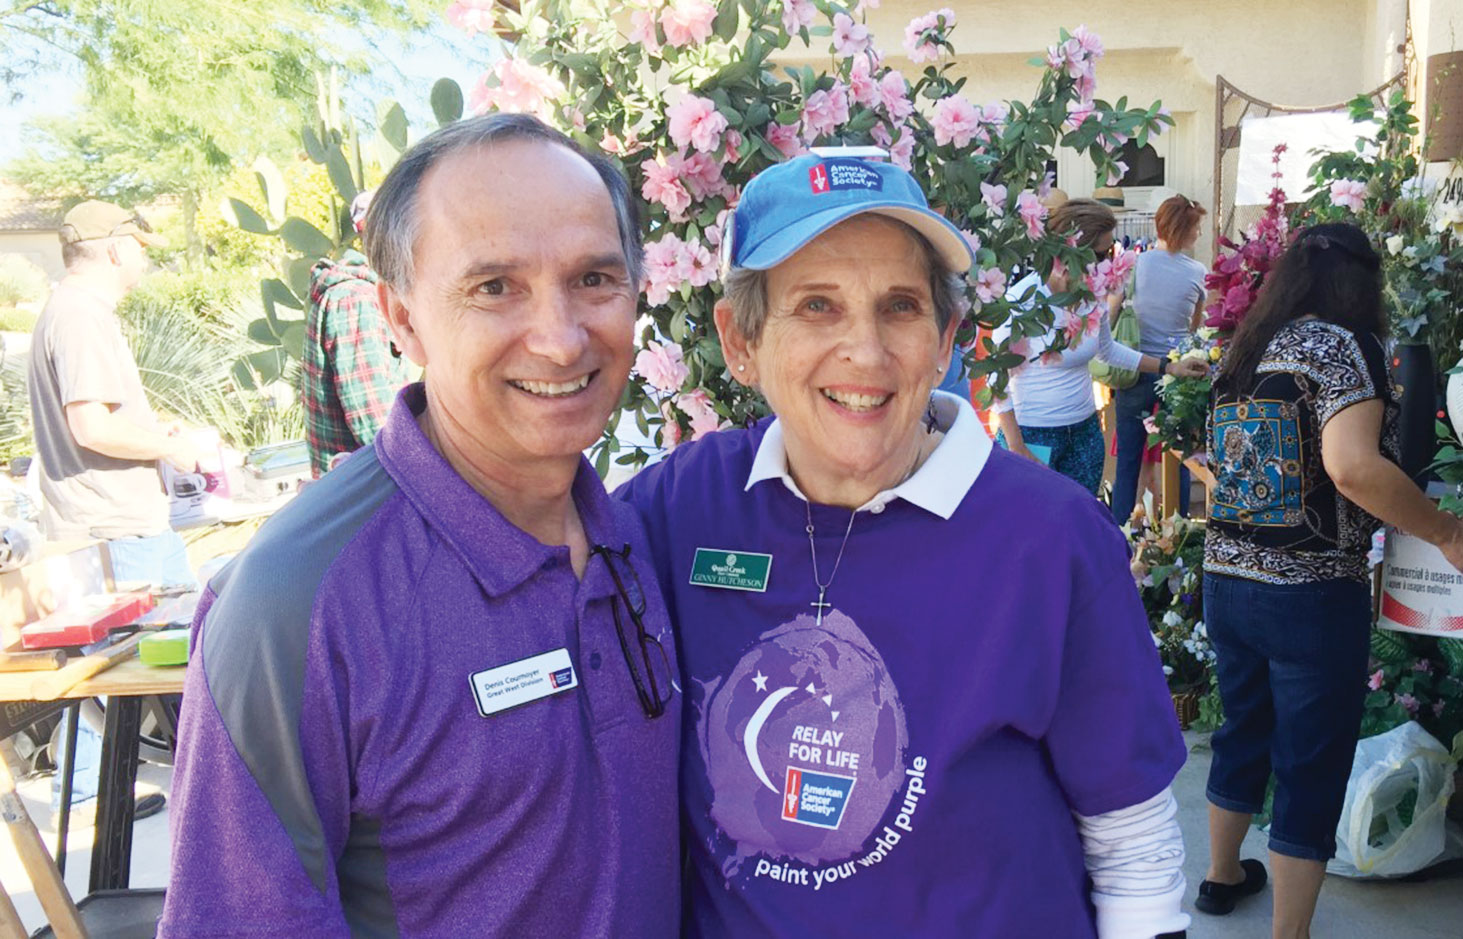 Denis Cournoyer, from The American Cancer Society, came to shop at the Quail Creek Relay garage sale and to support Team Captain Ginny Hutcheson in the fundraising efforts.